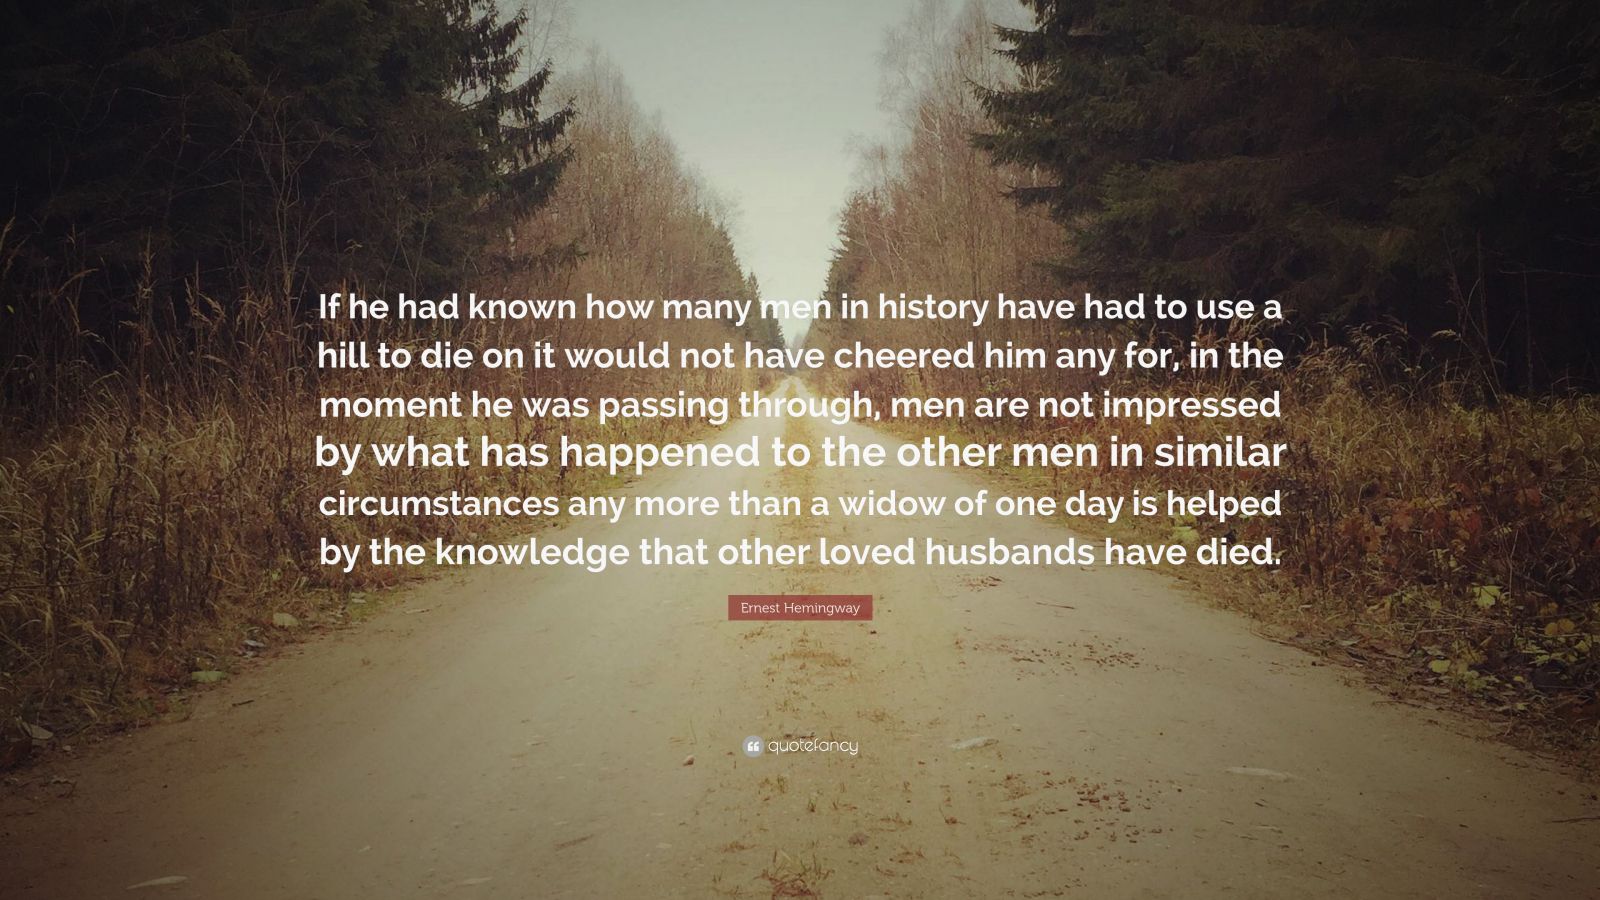 Ernest Hemingway Quote: “If he had known how many men in history have ...